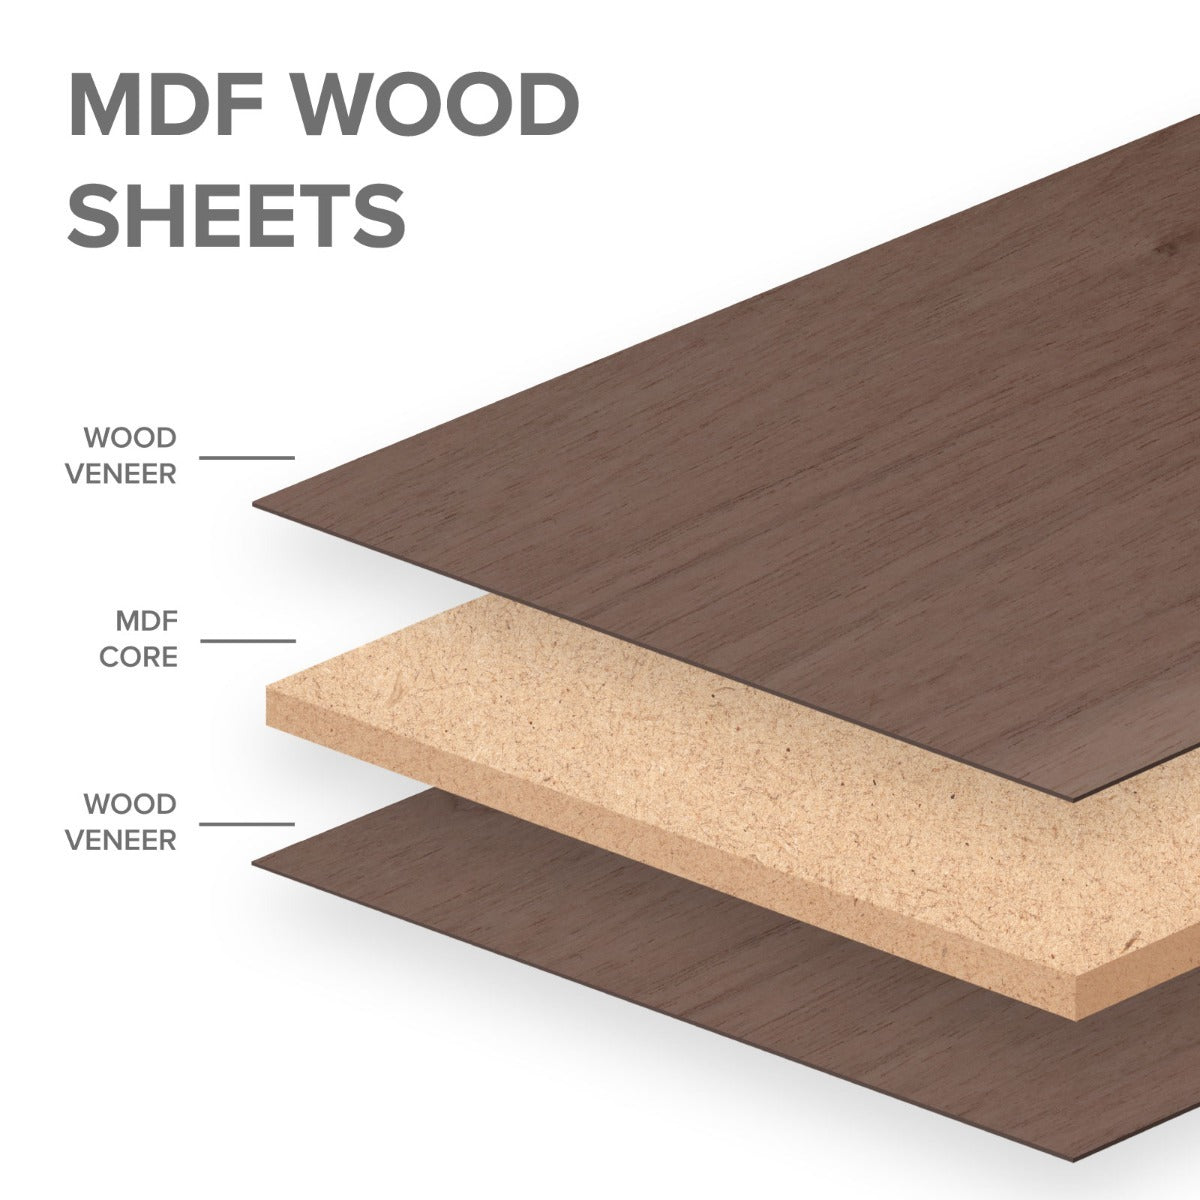 1/8" PLYWOOD SHEETS-Maple